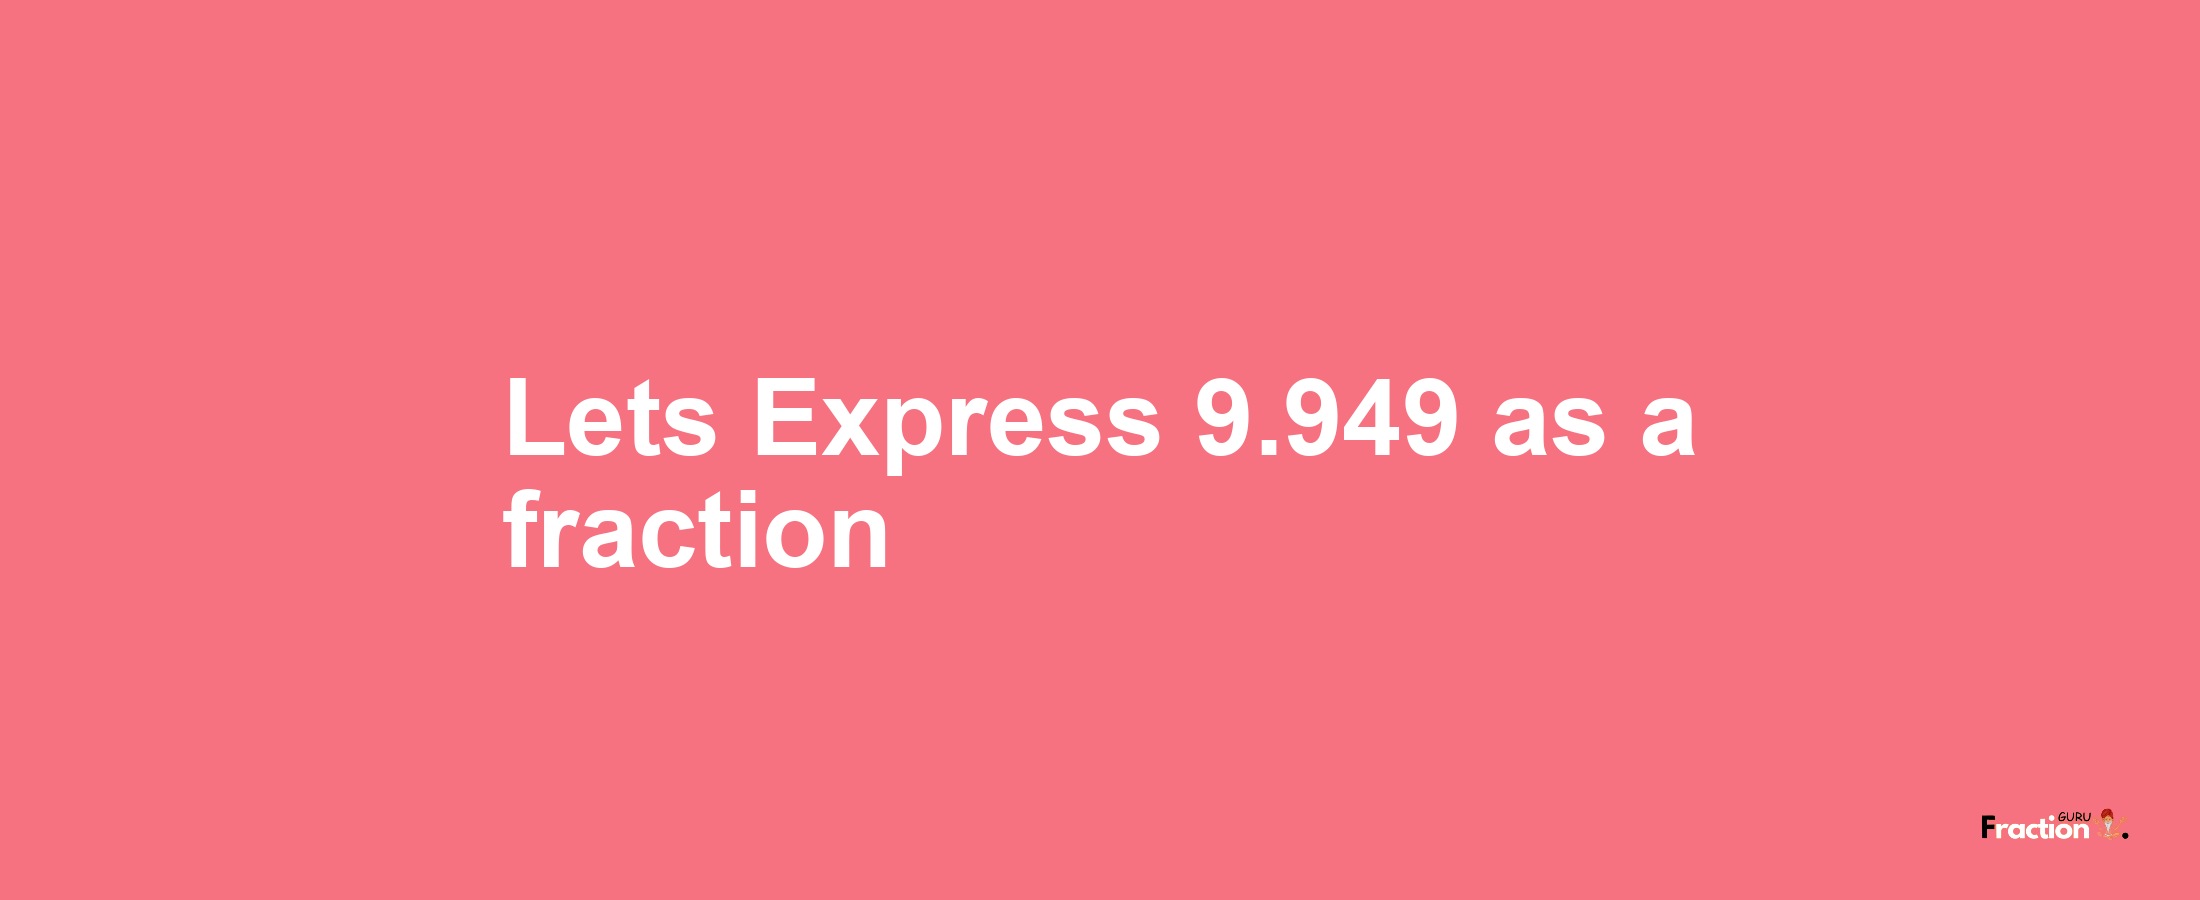 Lets Express 9.949 as afraction